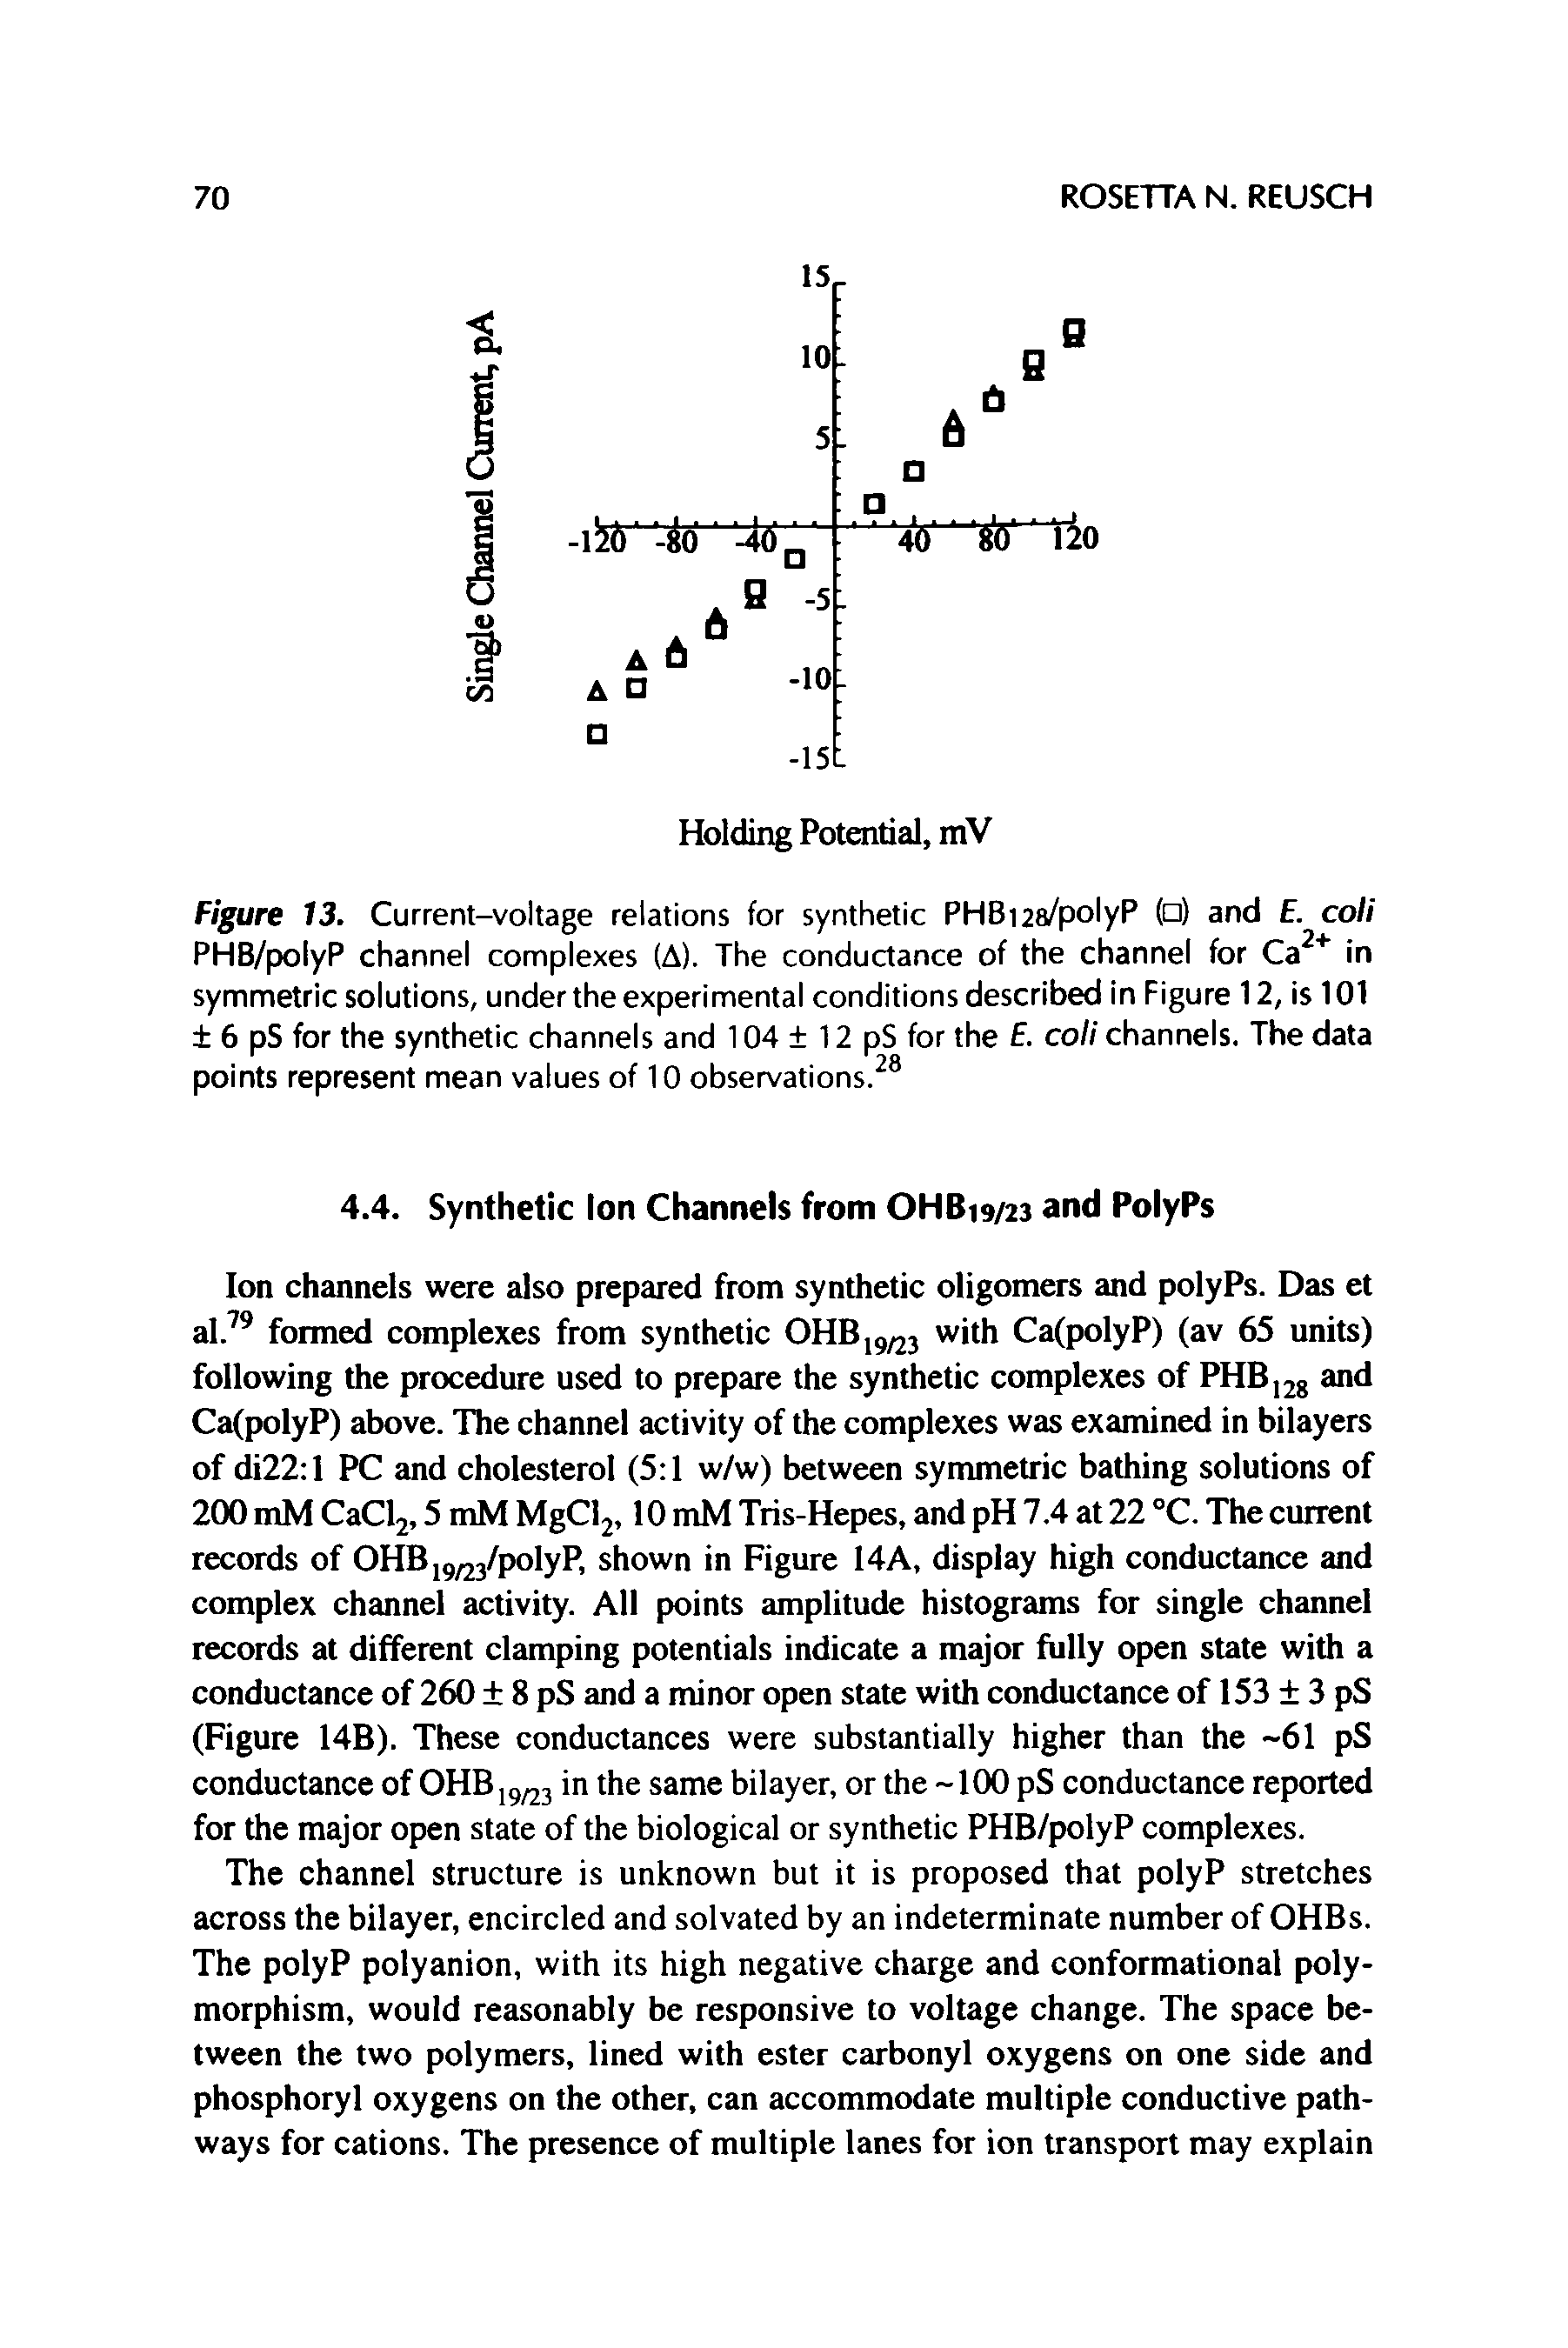 Figure 13. Current-voltage relations for synthetic PHBus/polyP ( ) and E. coli PHB/polyP channel complexes (A). The conductance of the channel for Ca2+ in symmetric solutions, under the experimental conditions described in Figure 12, is 101 6 pS for the synthetic channels and 104 12 pS for the E. coli channels. The data points represent mean values of 10 observations.28...